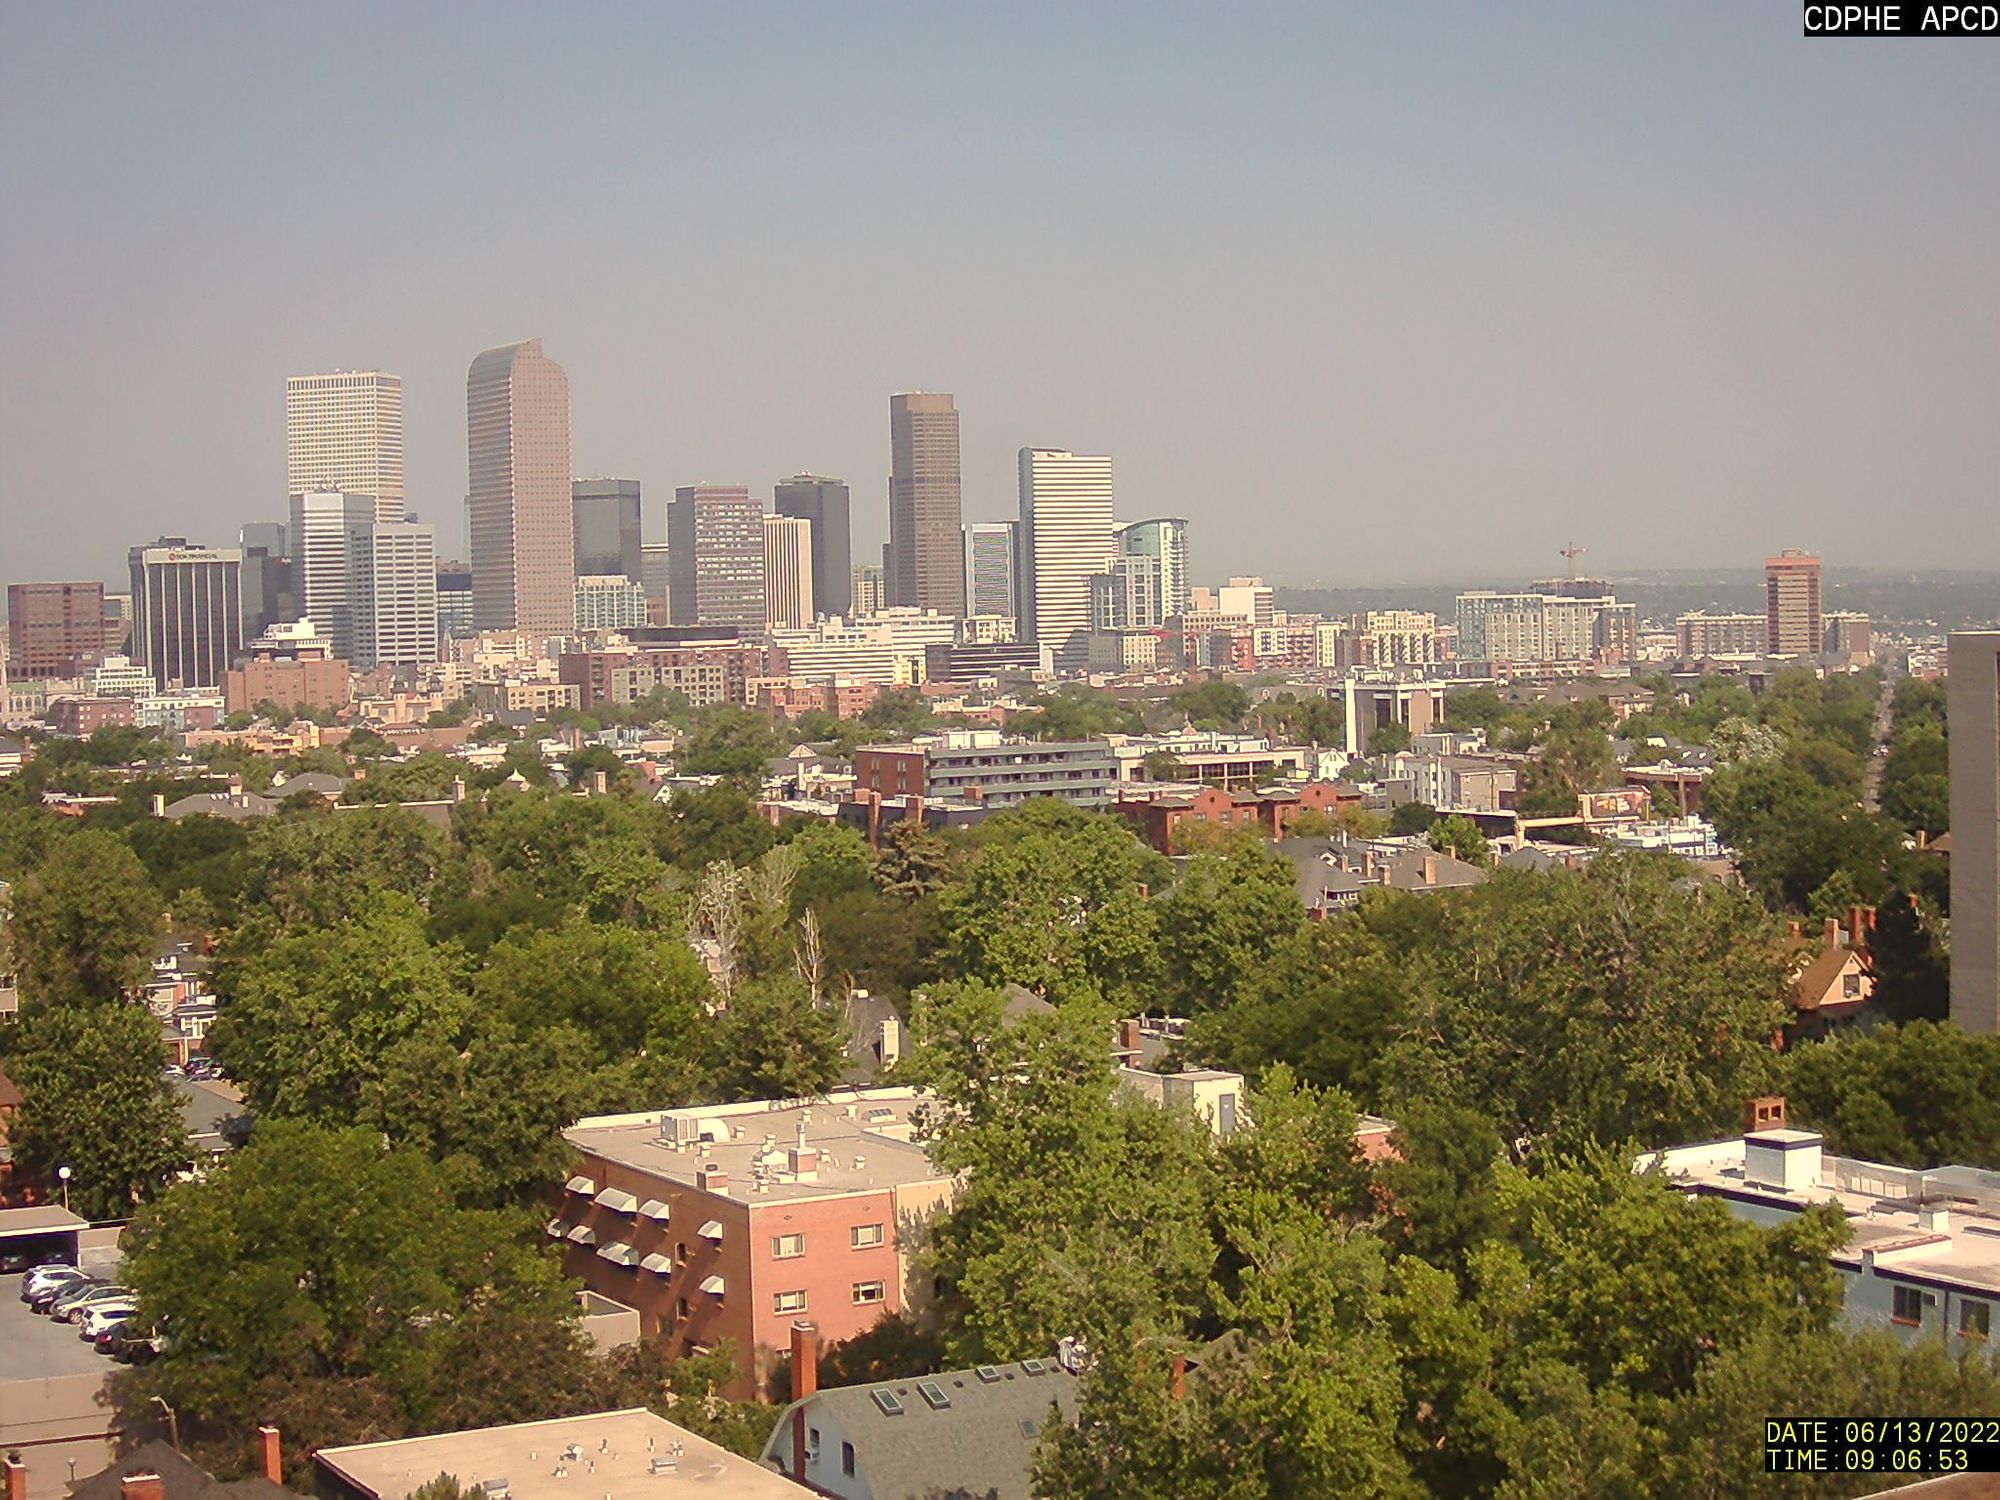 image: Smoky sky with near-record temperatures in Denver area Monday